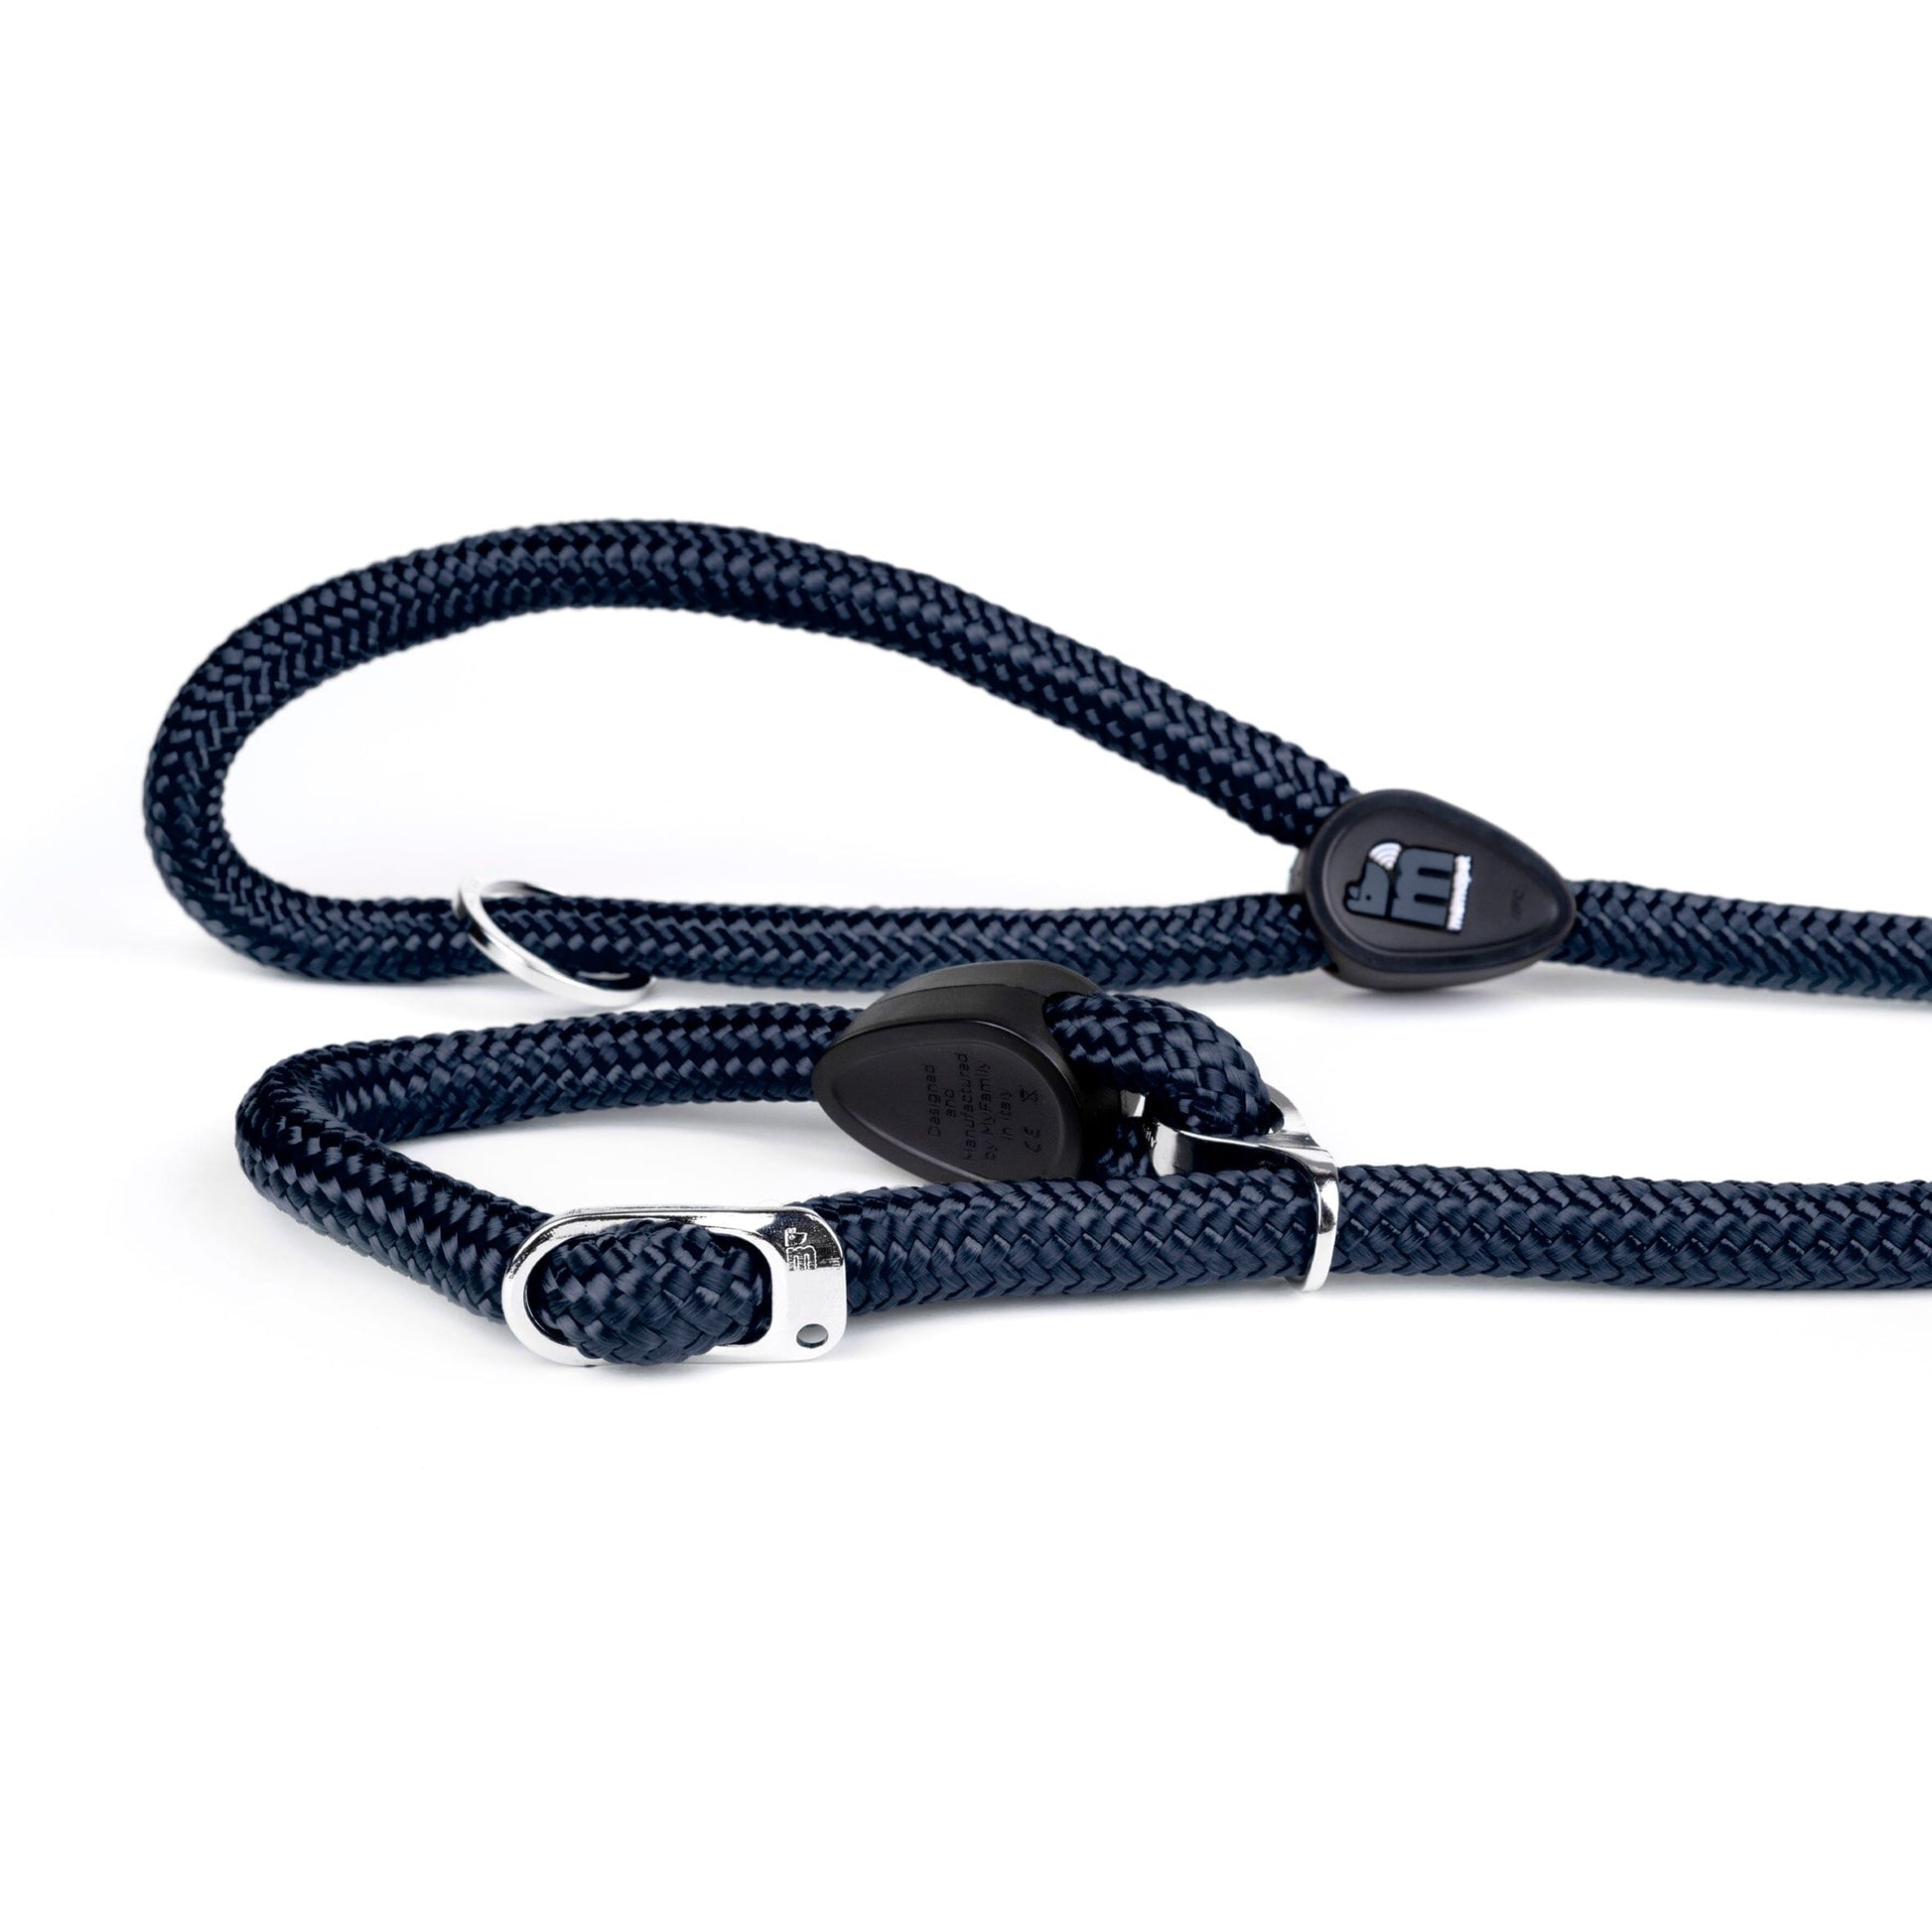 Memopet Dog Training Collar and Rope Leash 2in1 With Activity Tracking Device and Digital ID Pet Supplies My Family Medium Navy 